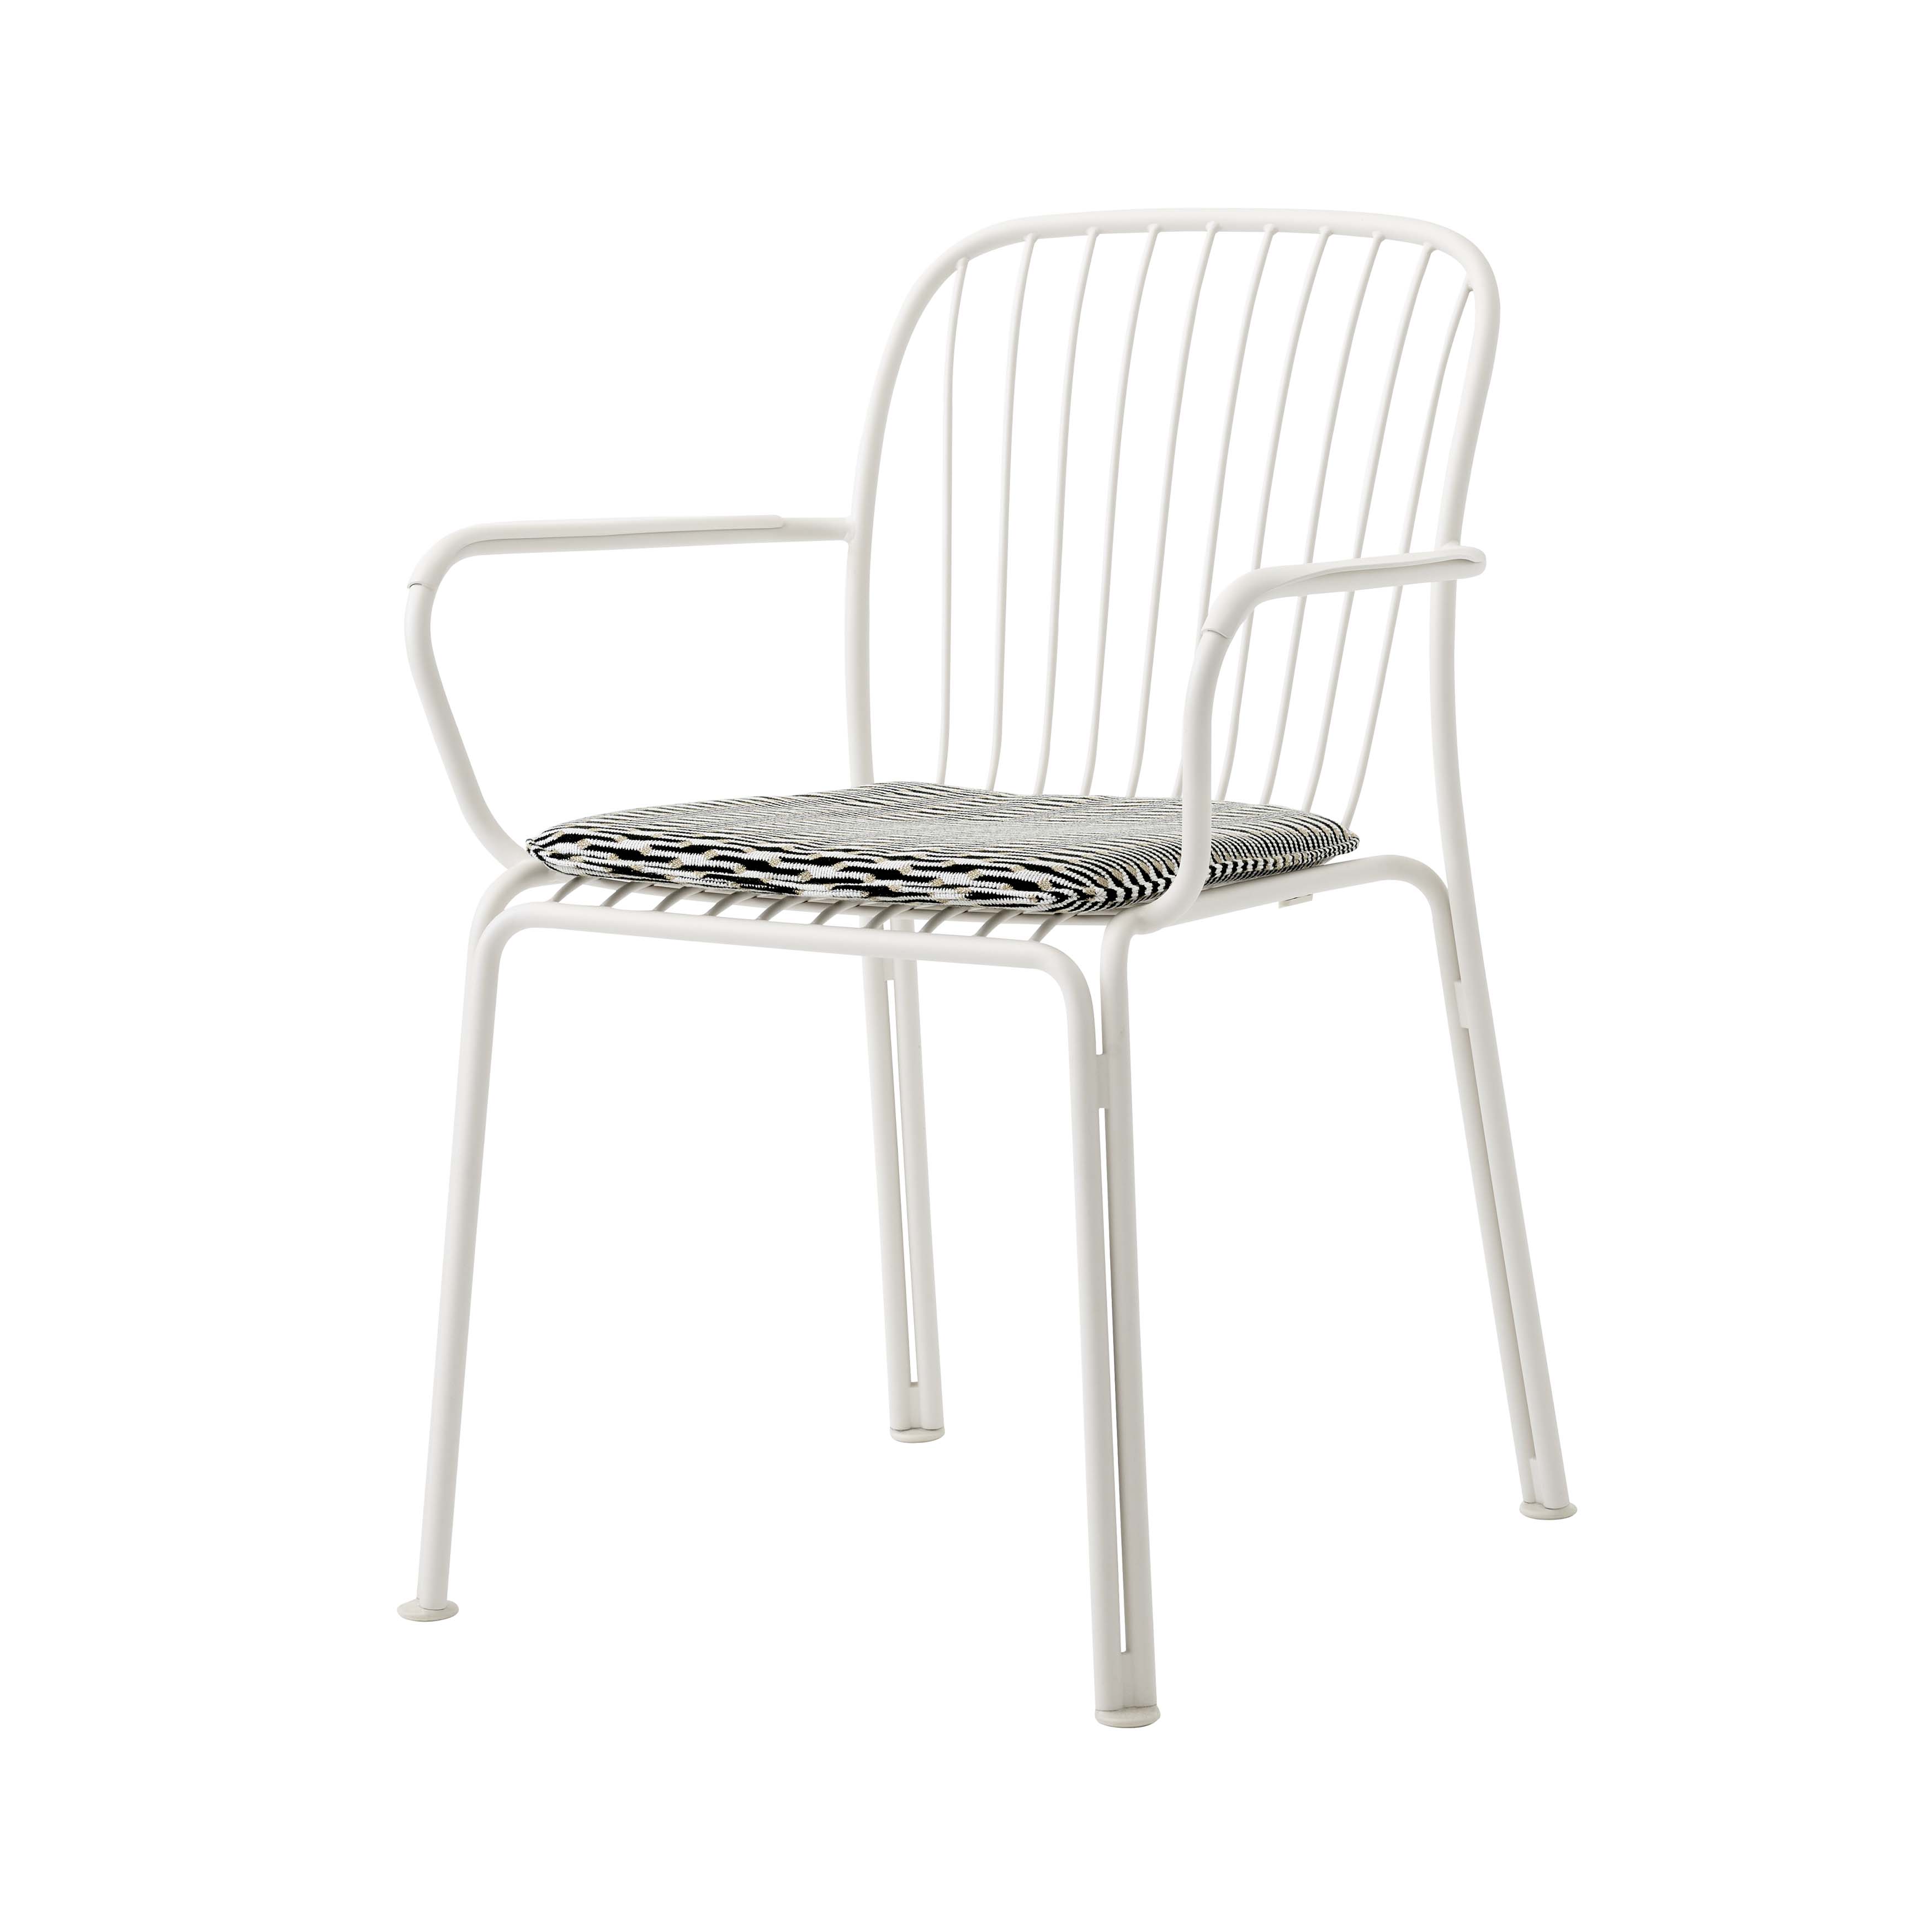 Thorvald SC95 Armchair with Seatpad: Outdoor + Ivory + Marquetry Bora 